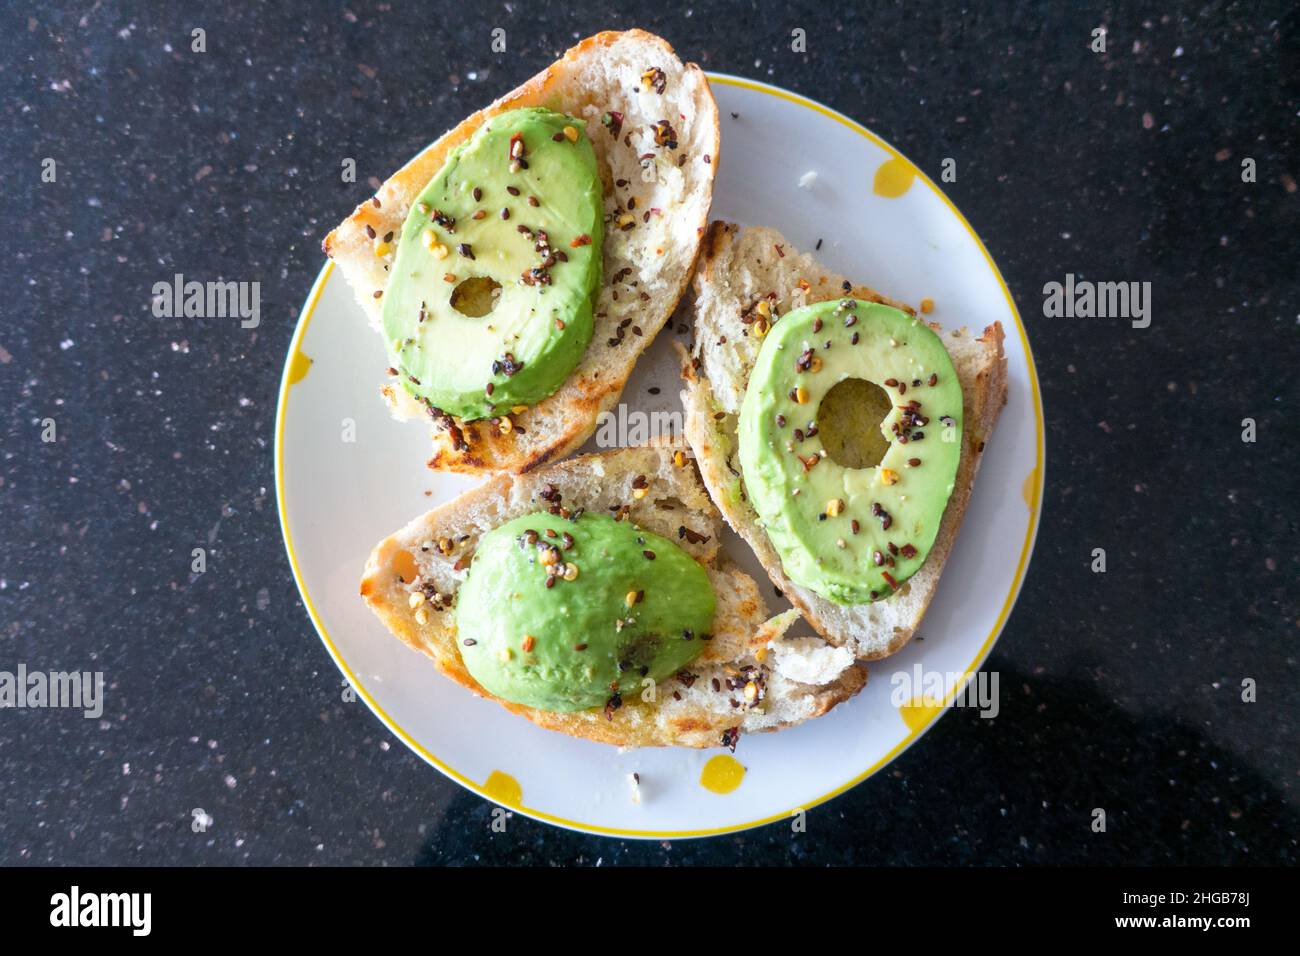 Sliced avocado on rustic bread slices with black sesame seeds and chili flakes placed on a plate top down view Stock Photo